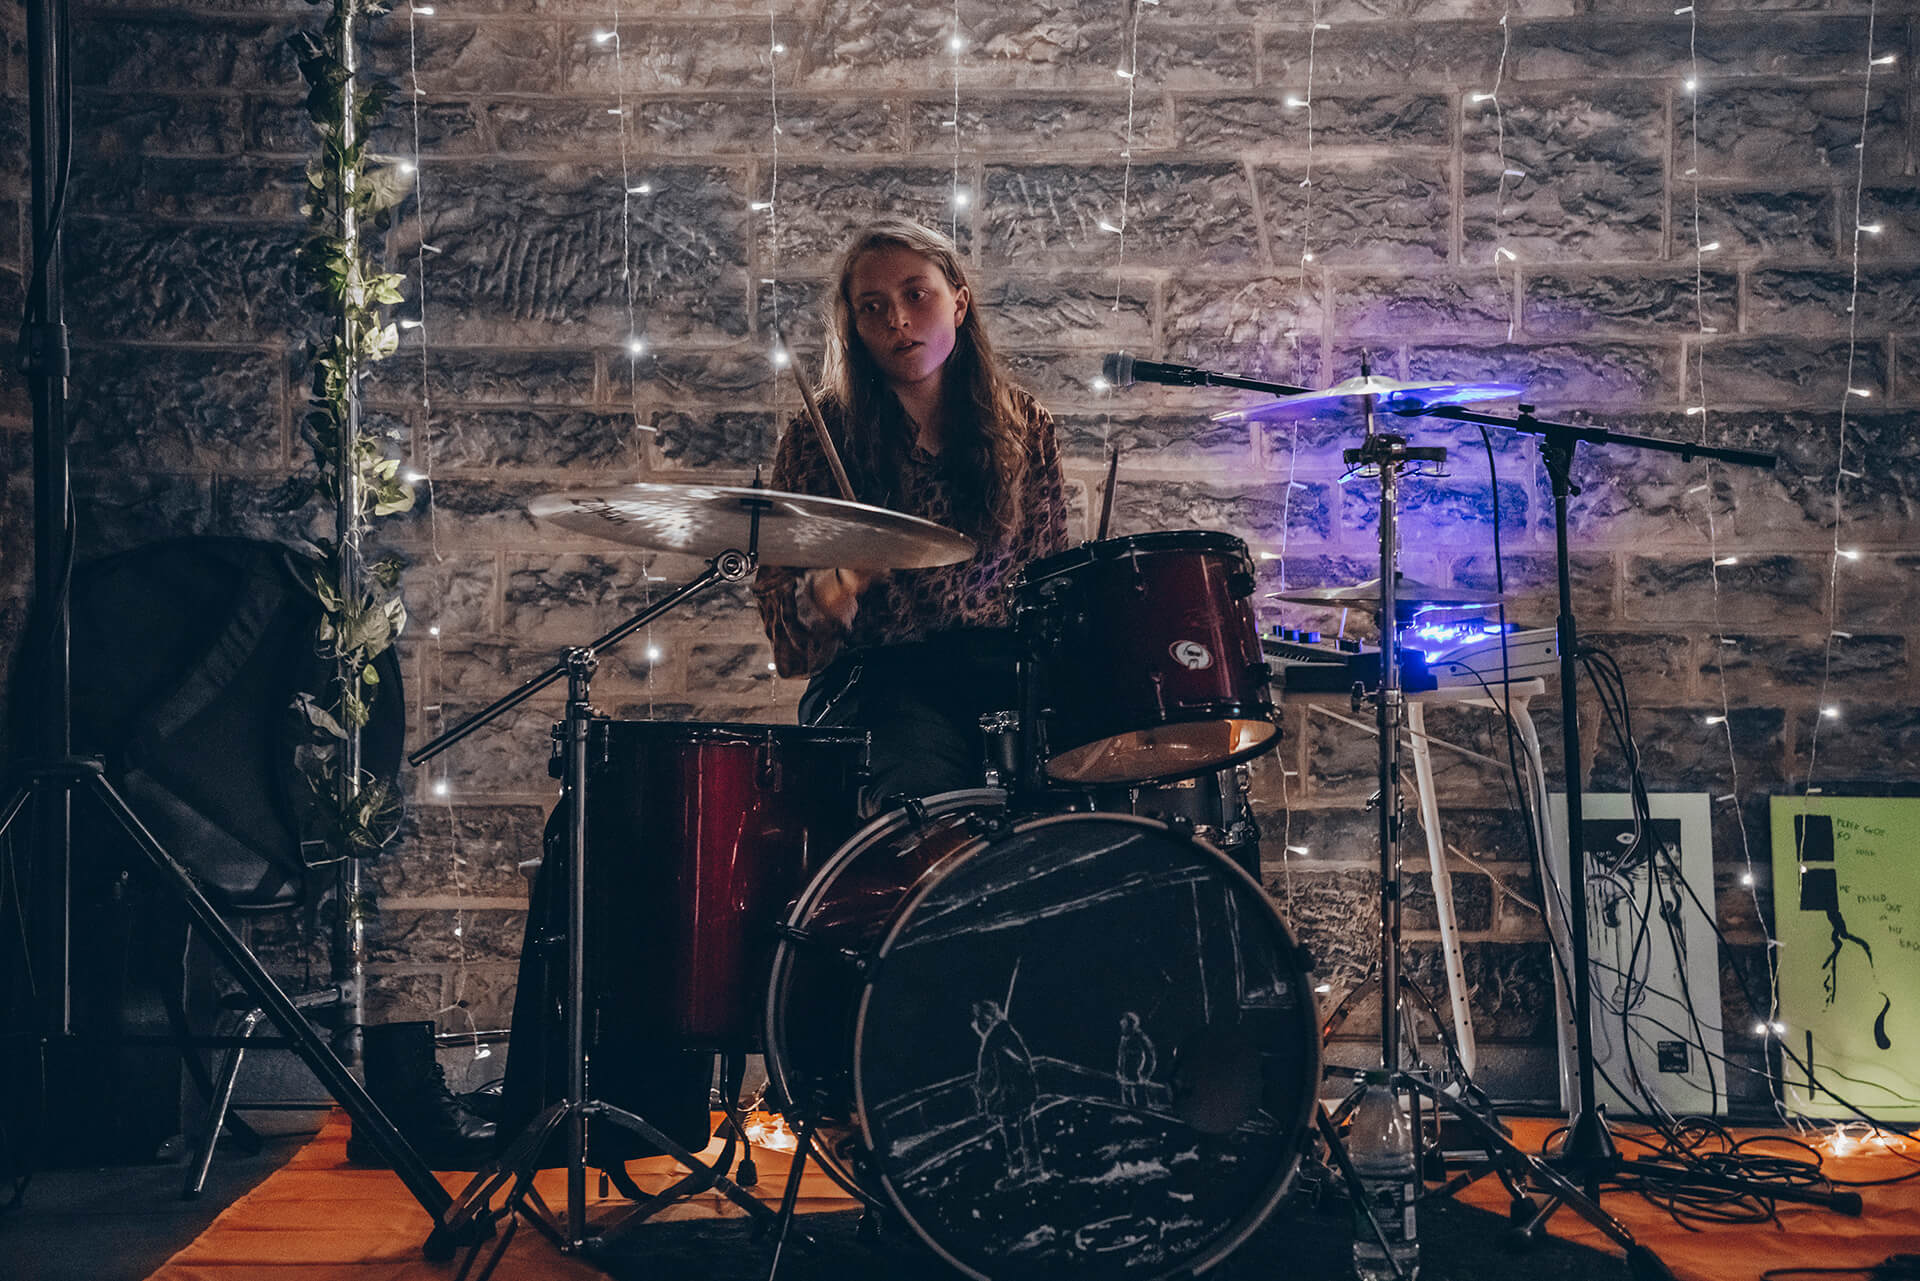 A woman drumming behind a drum at night and some string lights hanging on the wall behind her